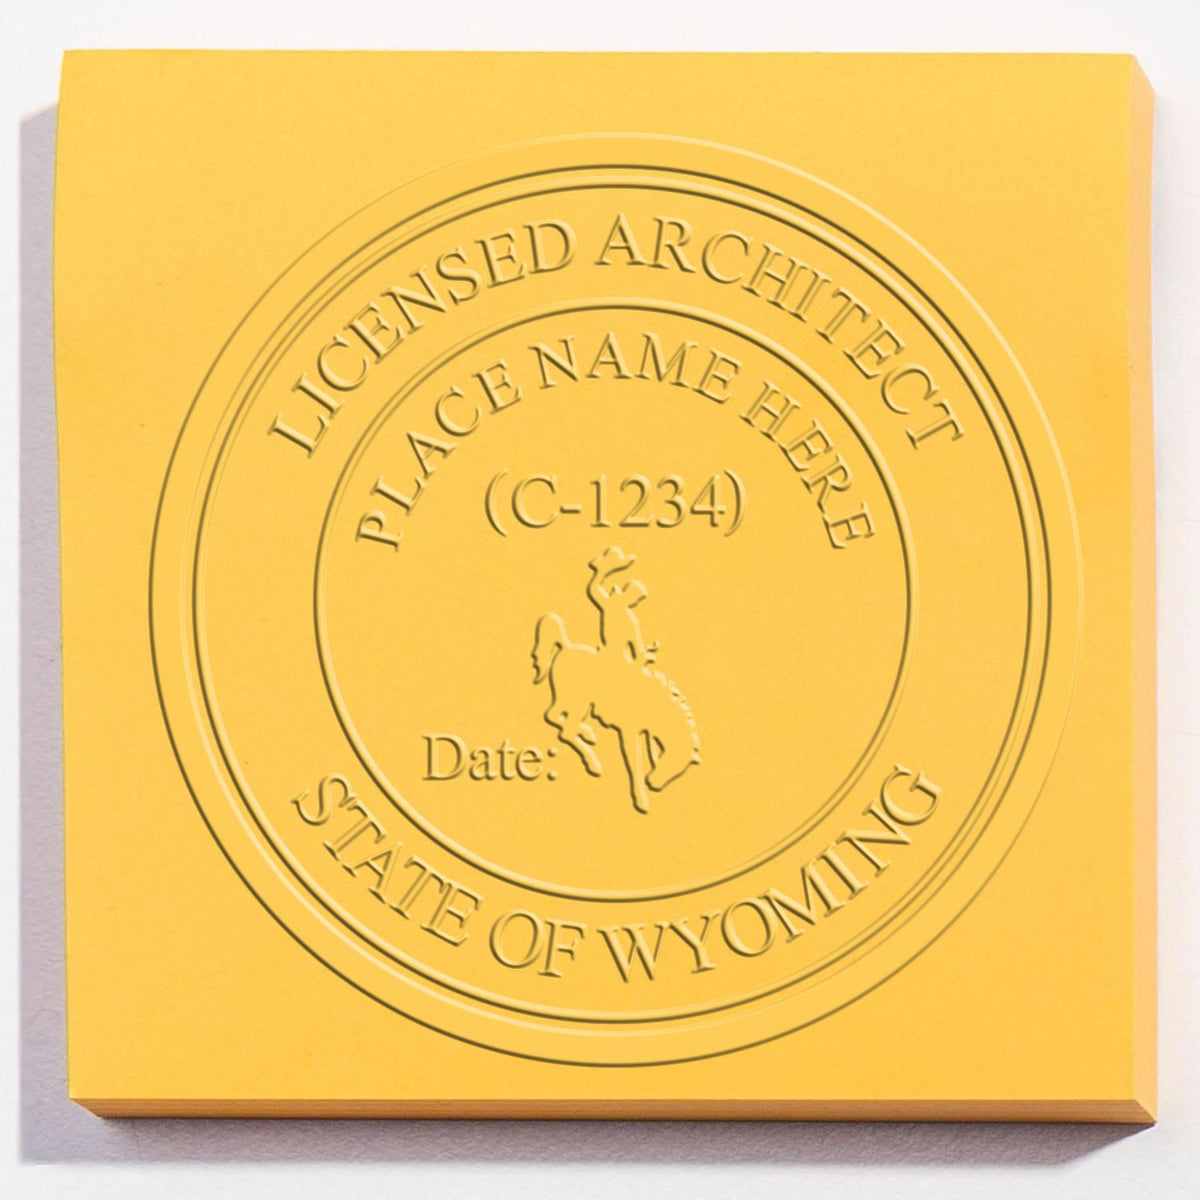 A lifestyle photo showing a stamped image of the Wyoming Desk Architect Embossing Seal on a piece of paper